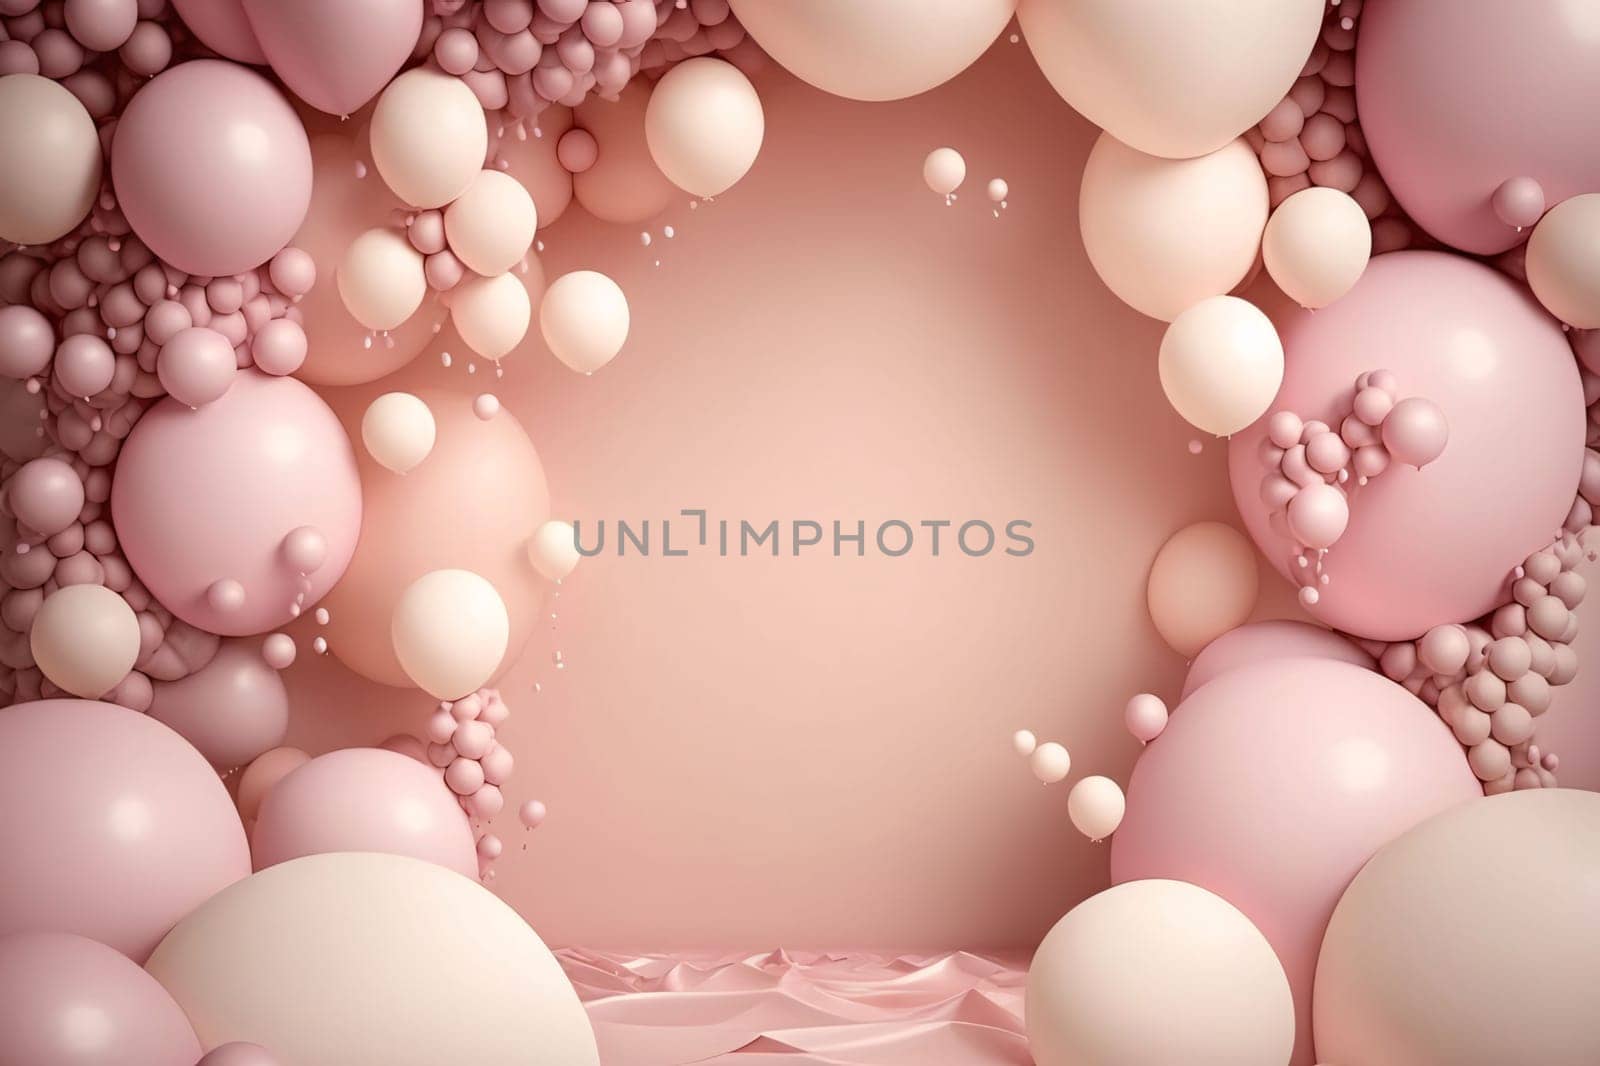 Banner: 3d render of abstract background with pastel pink and white balloons